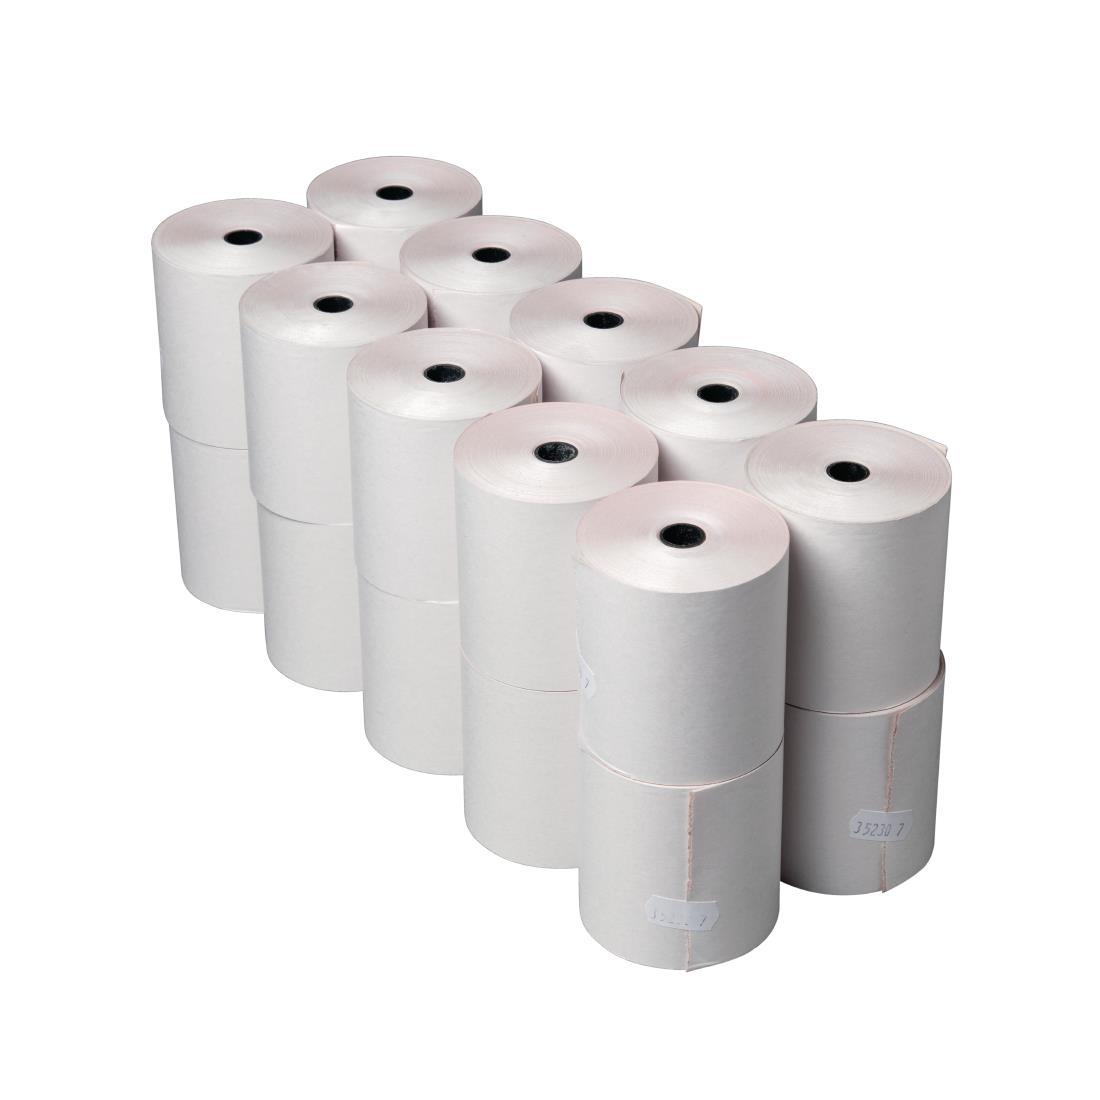 Fiesta Non-Thermal 3ply Till Roll 75 x 70mm (Pack of 20) - DK597  - 3